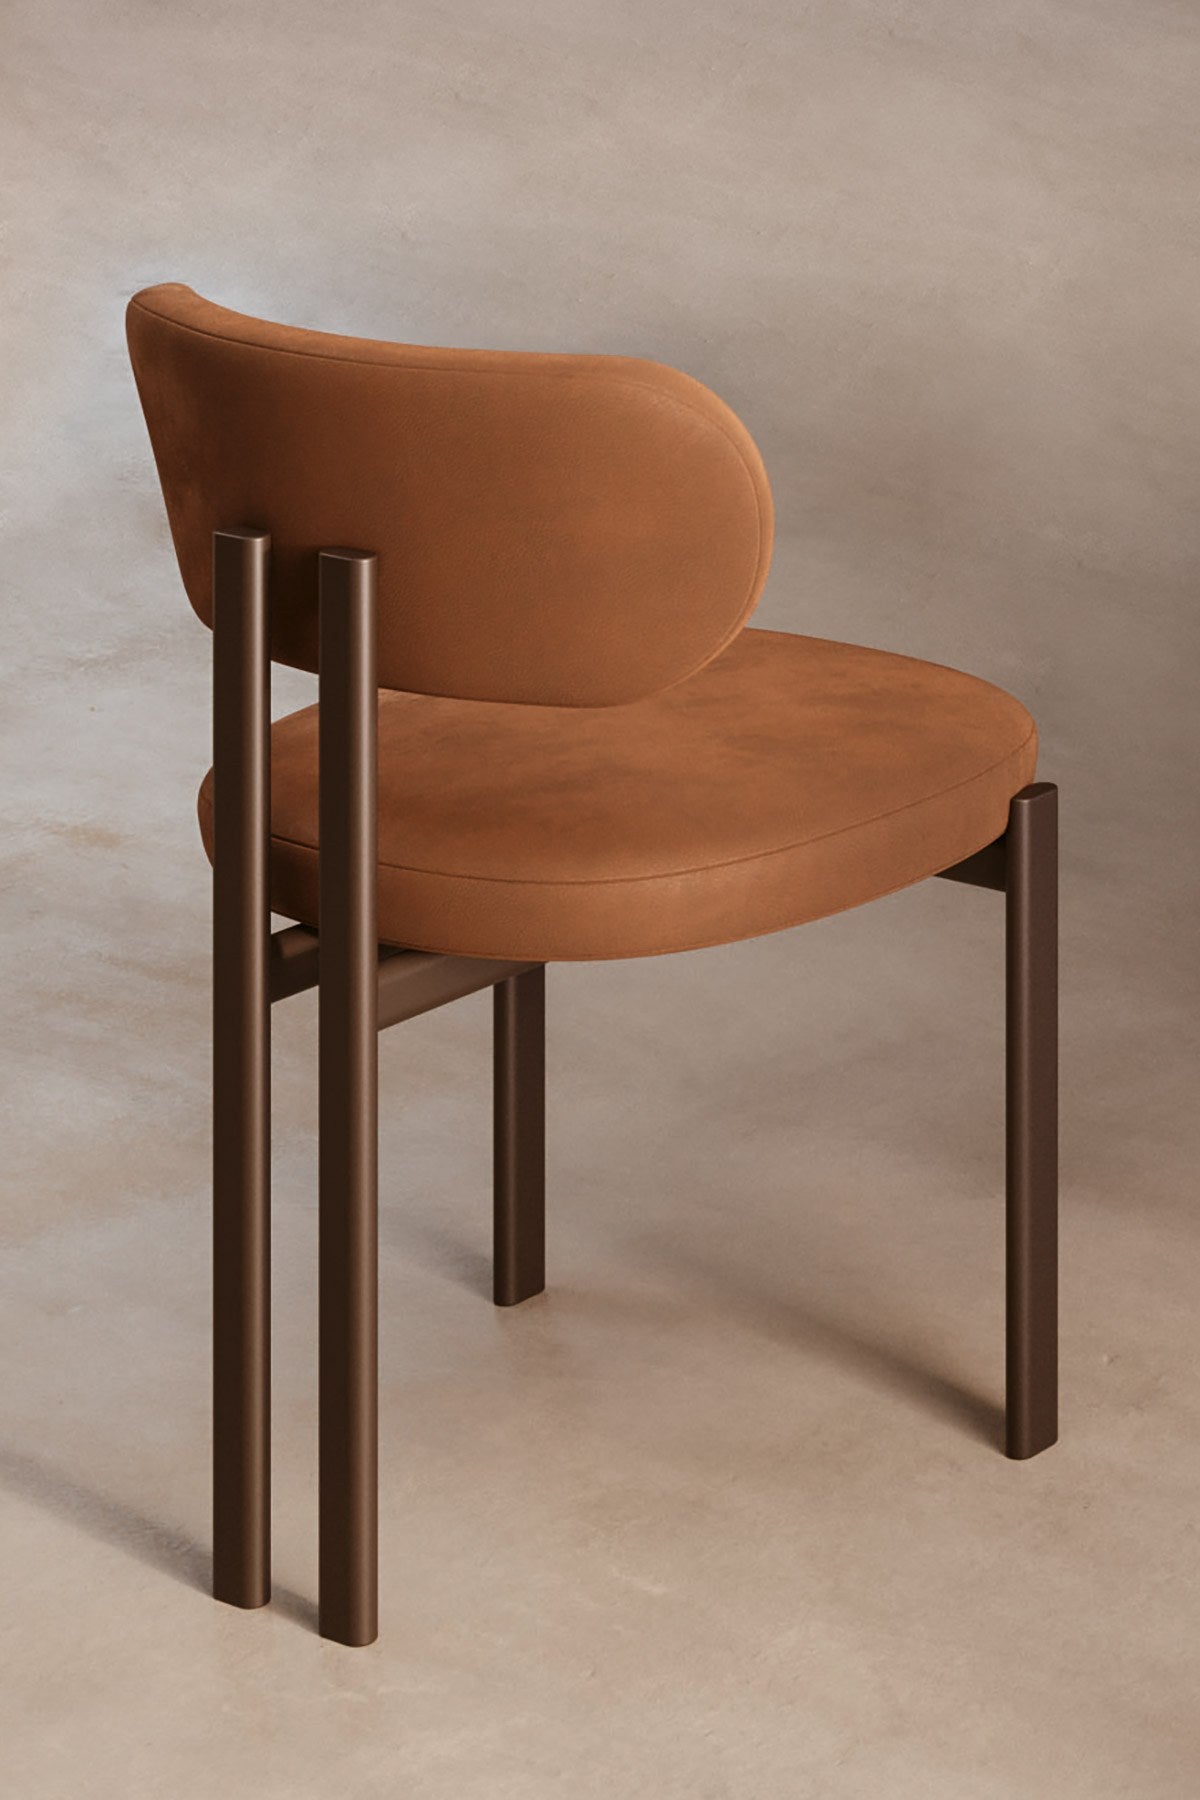 BAY METAL  l chair by NATUREDESIGN